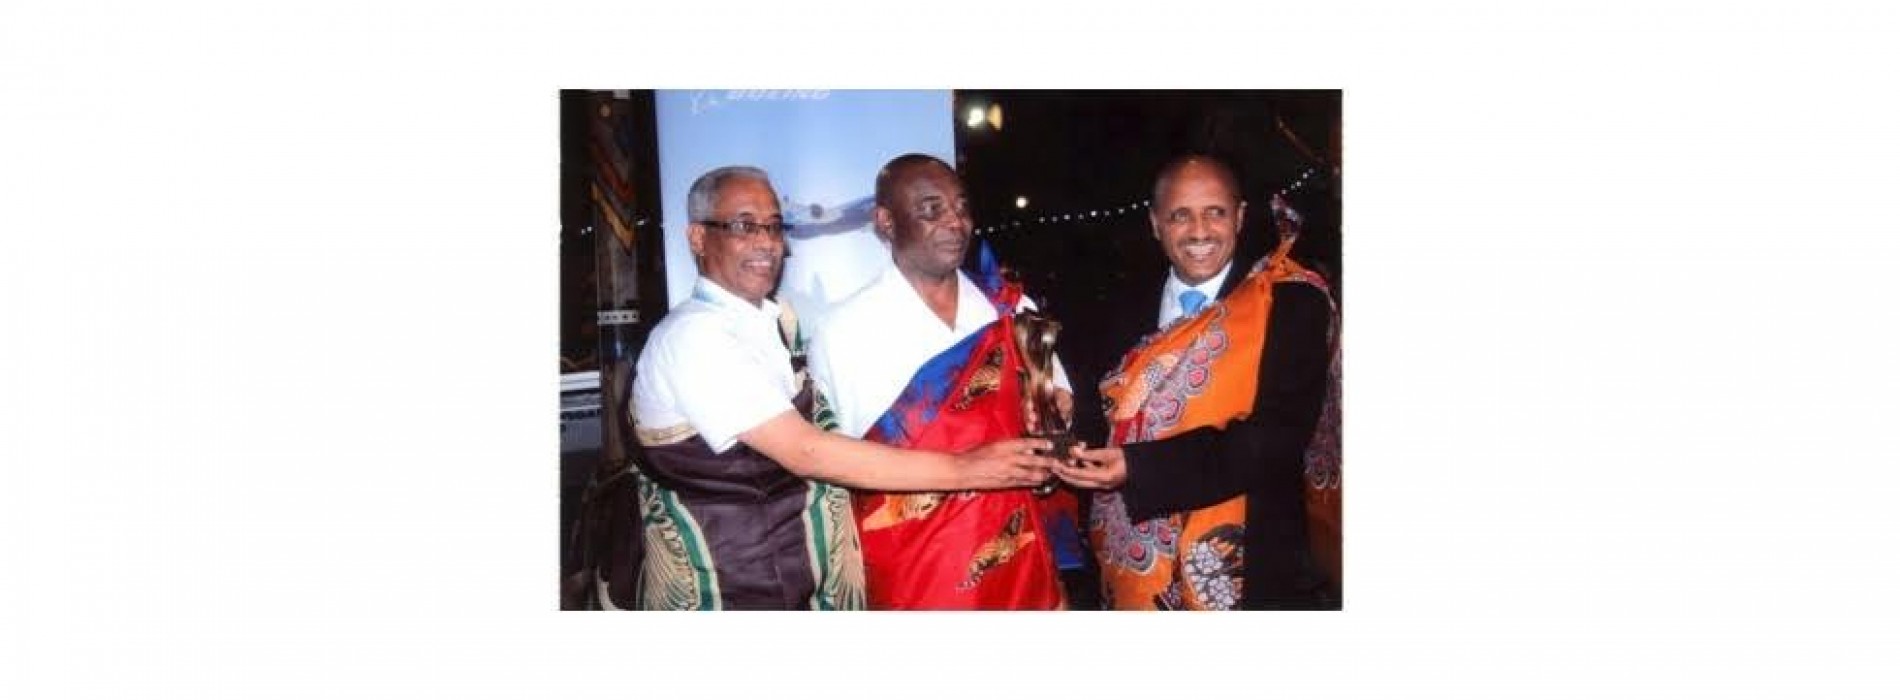 Ethiopian received Airline of the Year Award for the fifth year in a row from AFRAA